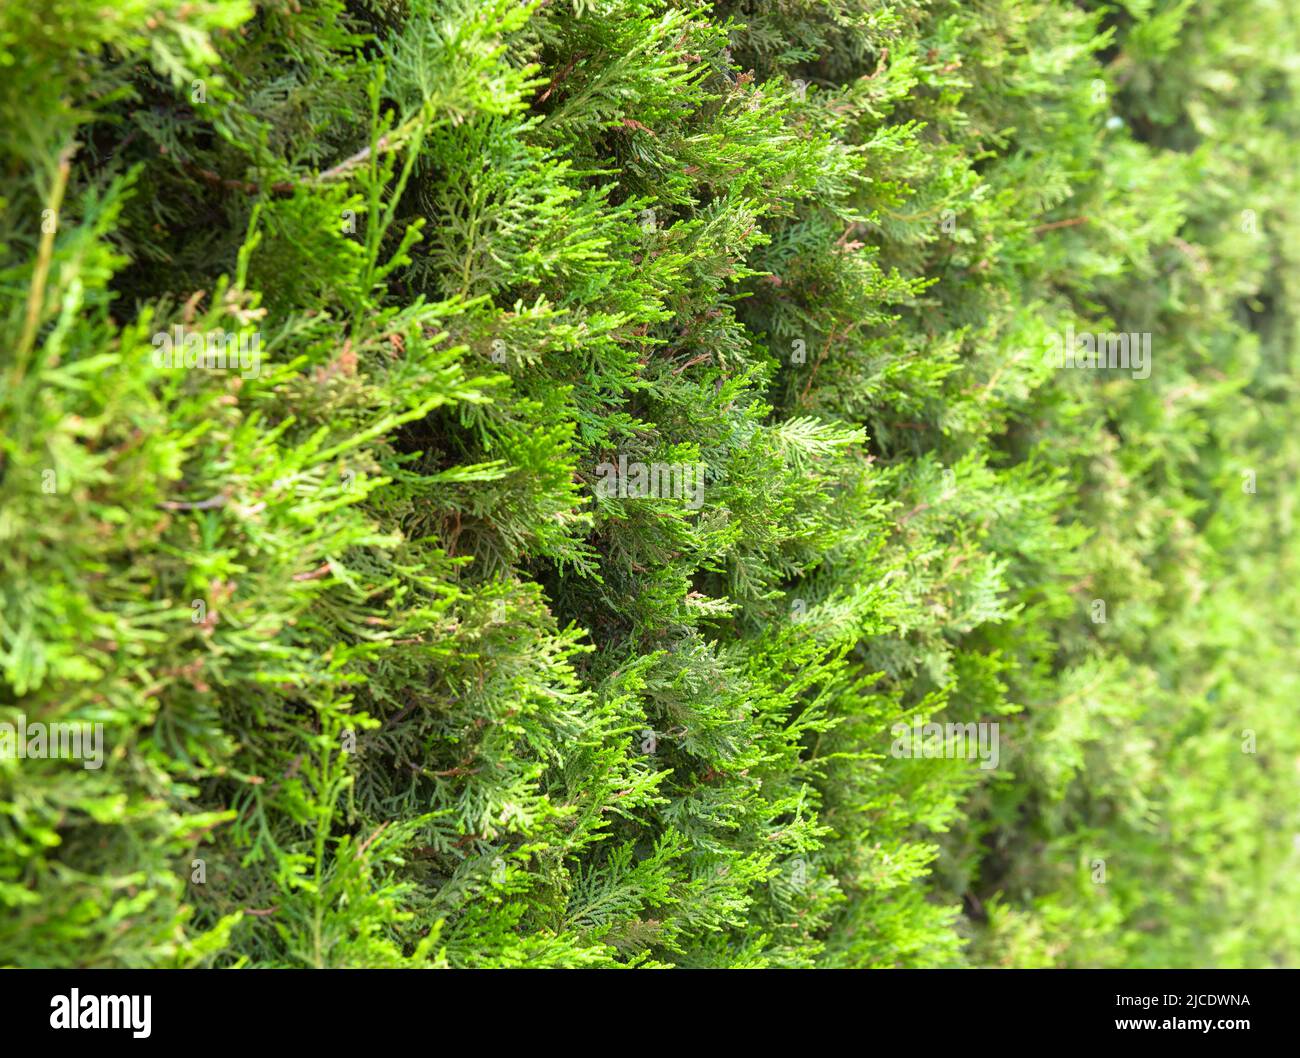 Thuja trees texture background. Coniferous evergreen hedge of home garden, green fence of thuja plants in backyard. Landscaping and nature theme. Stock Photo